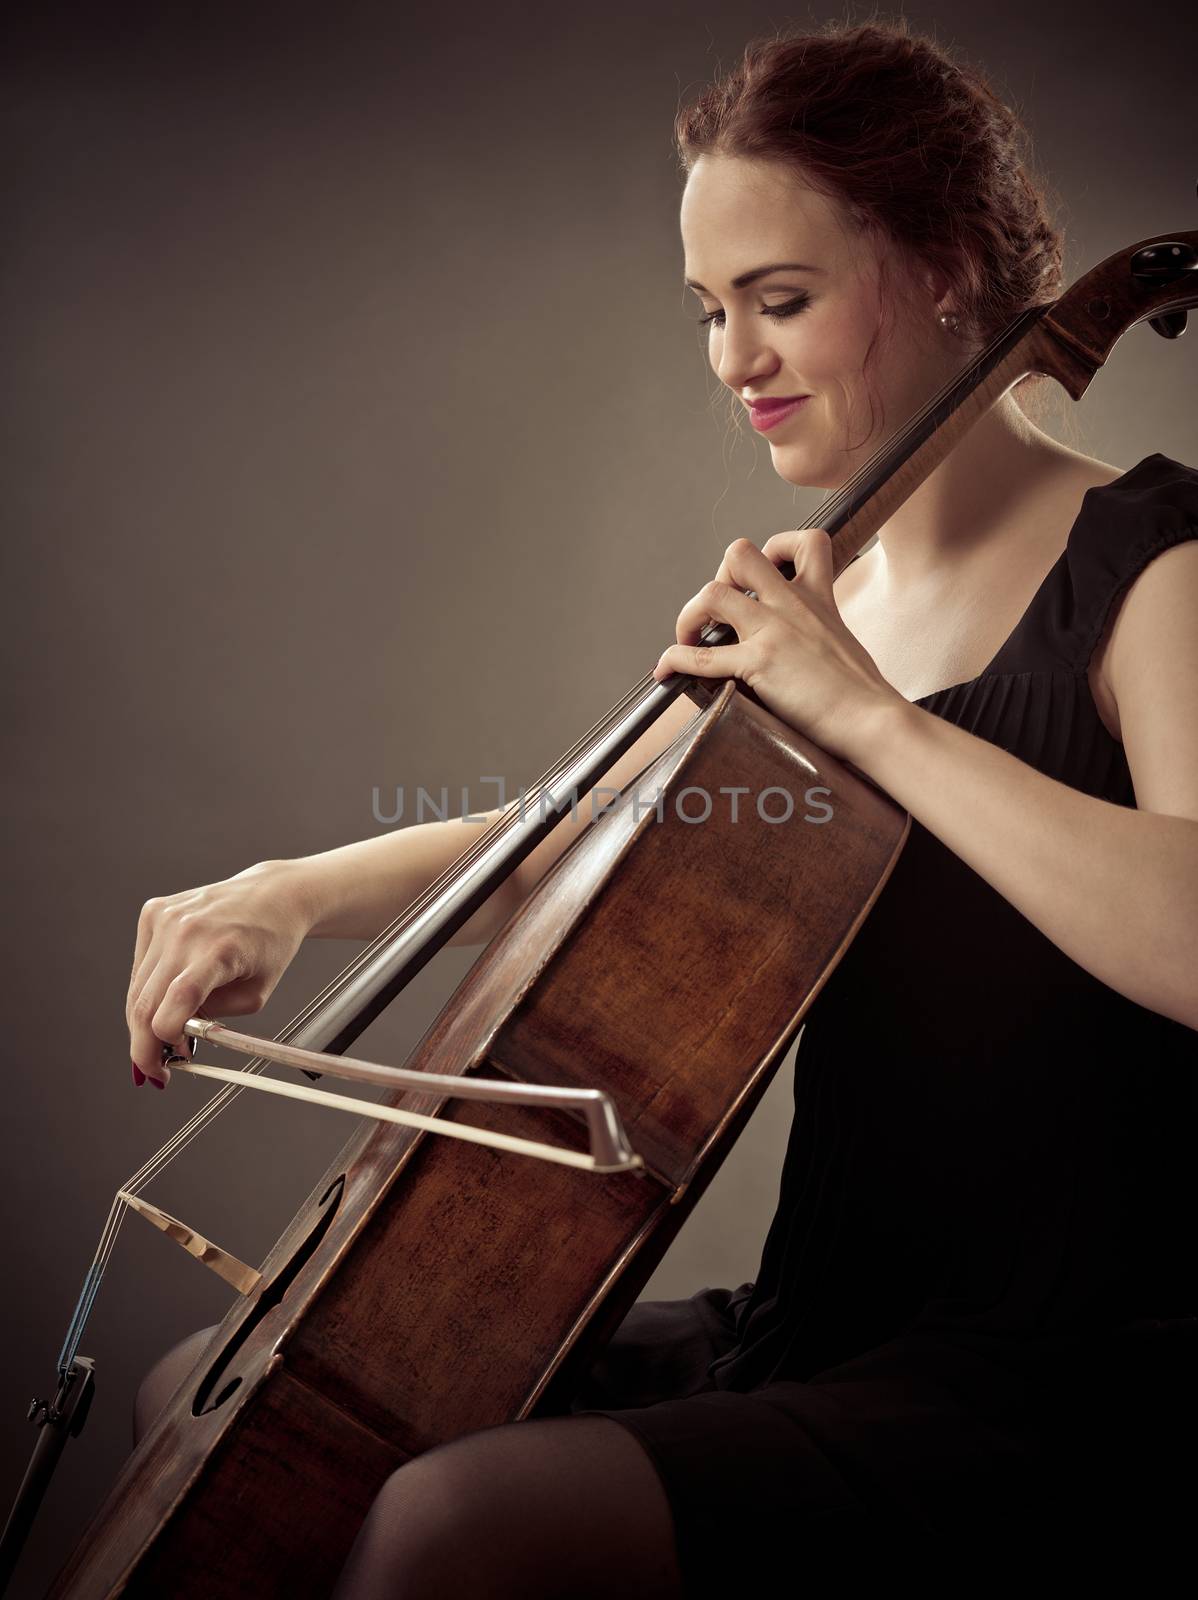 Smiling Cellist playing her old cello by sumners